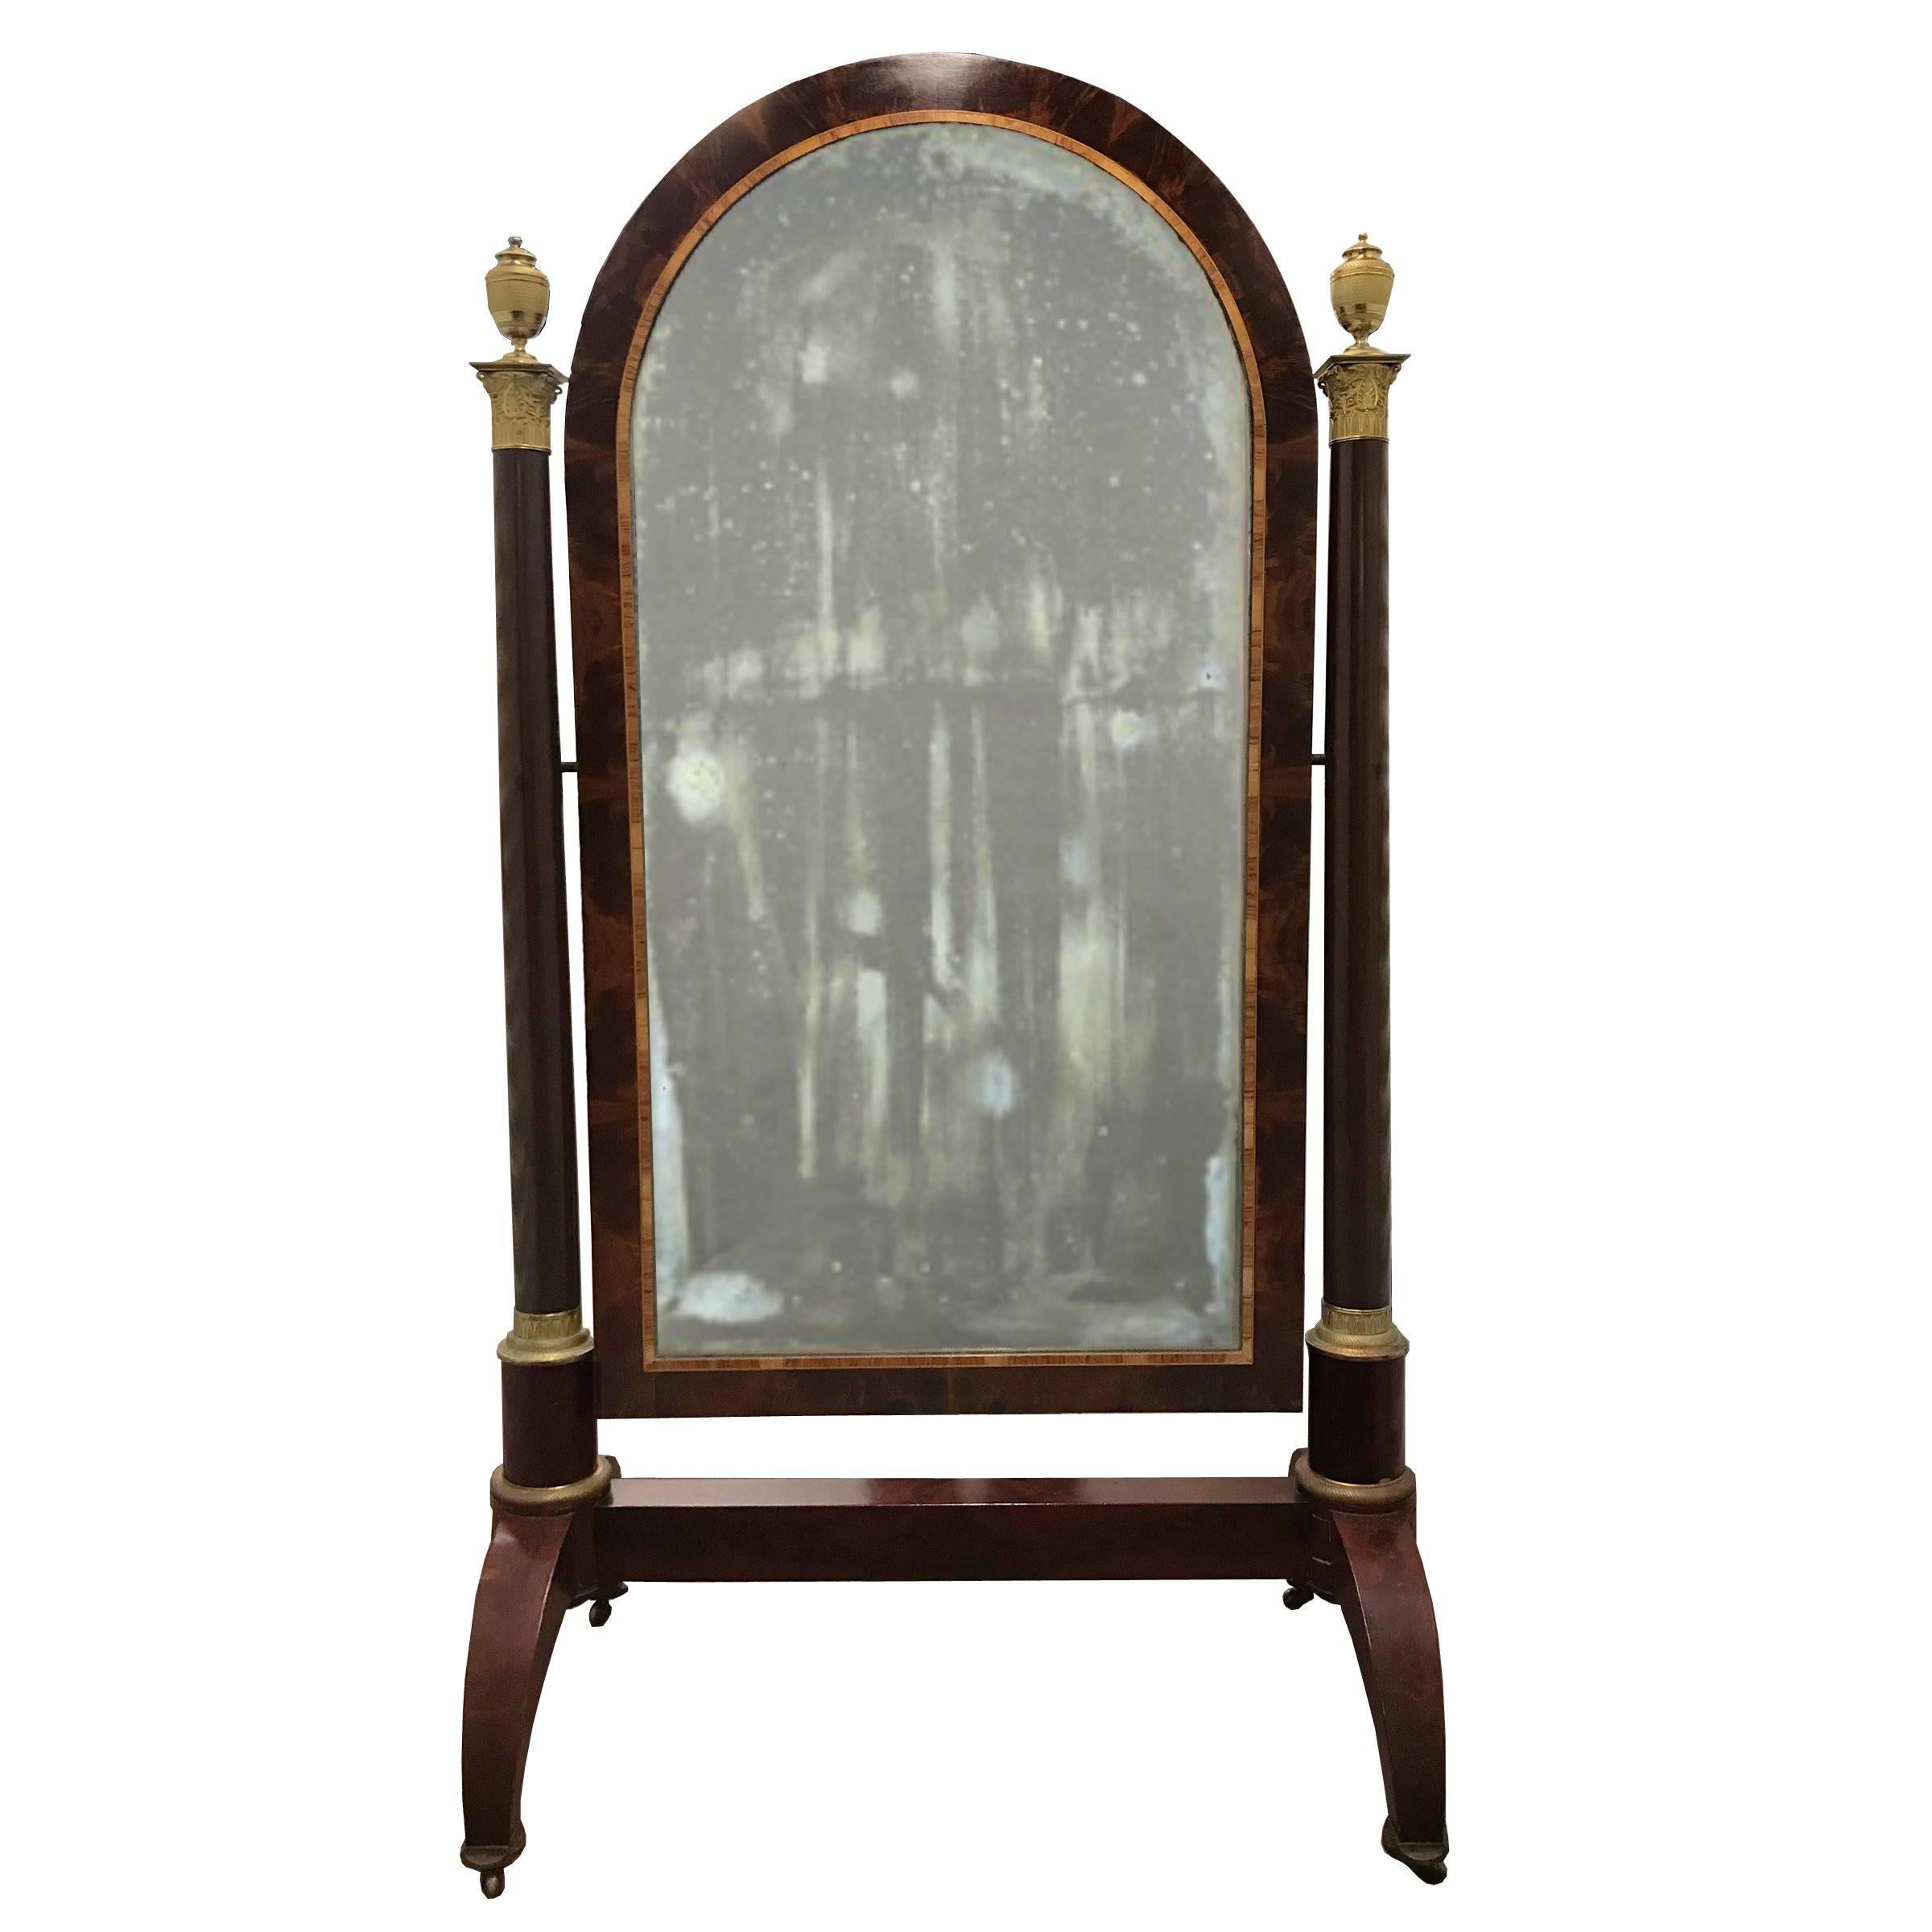 Important Early 19th Century French Empire Dressing Mirror